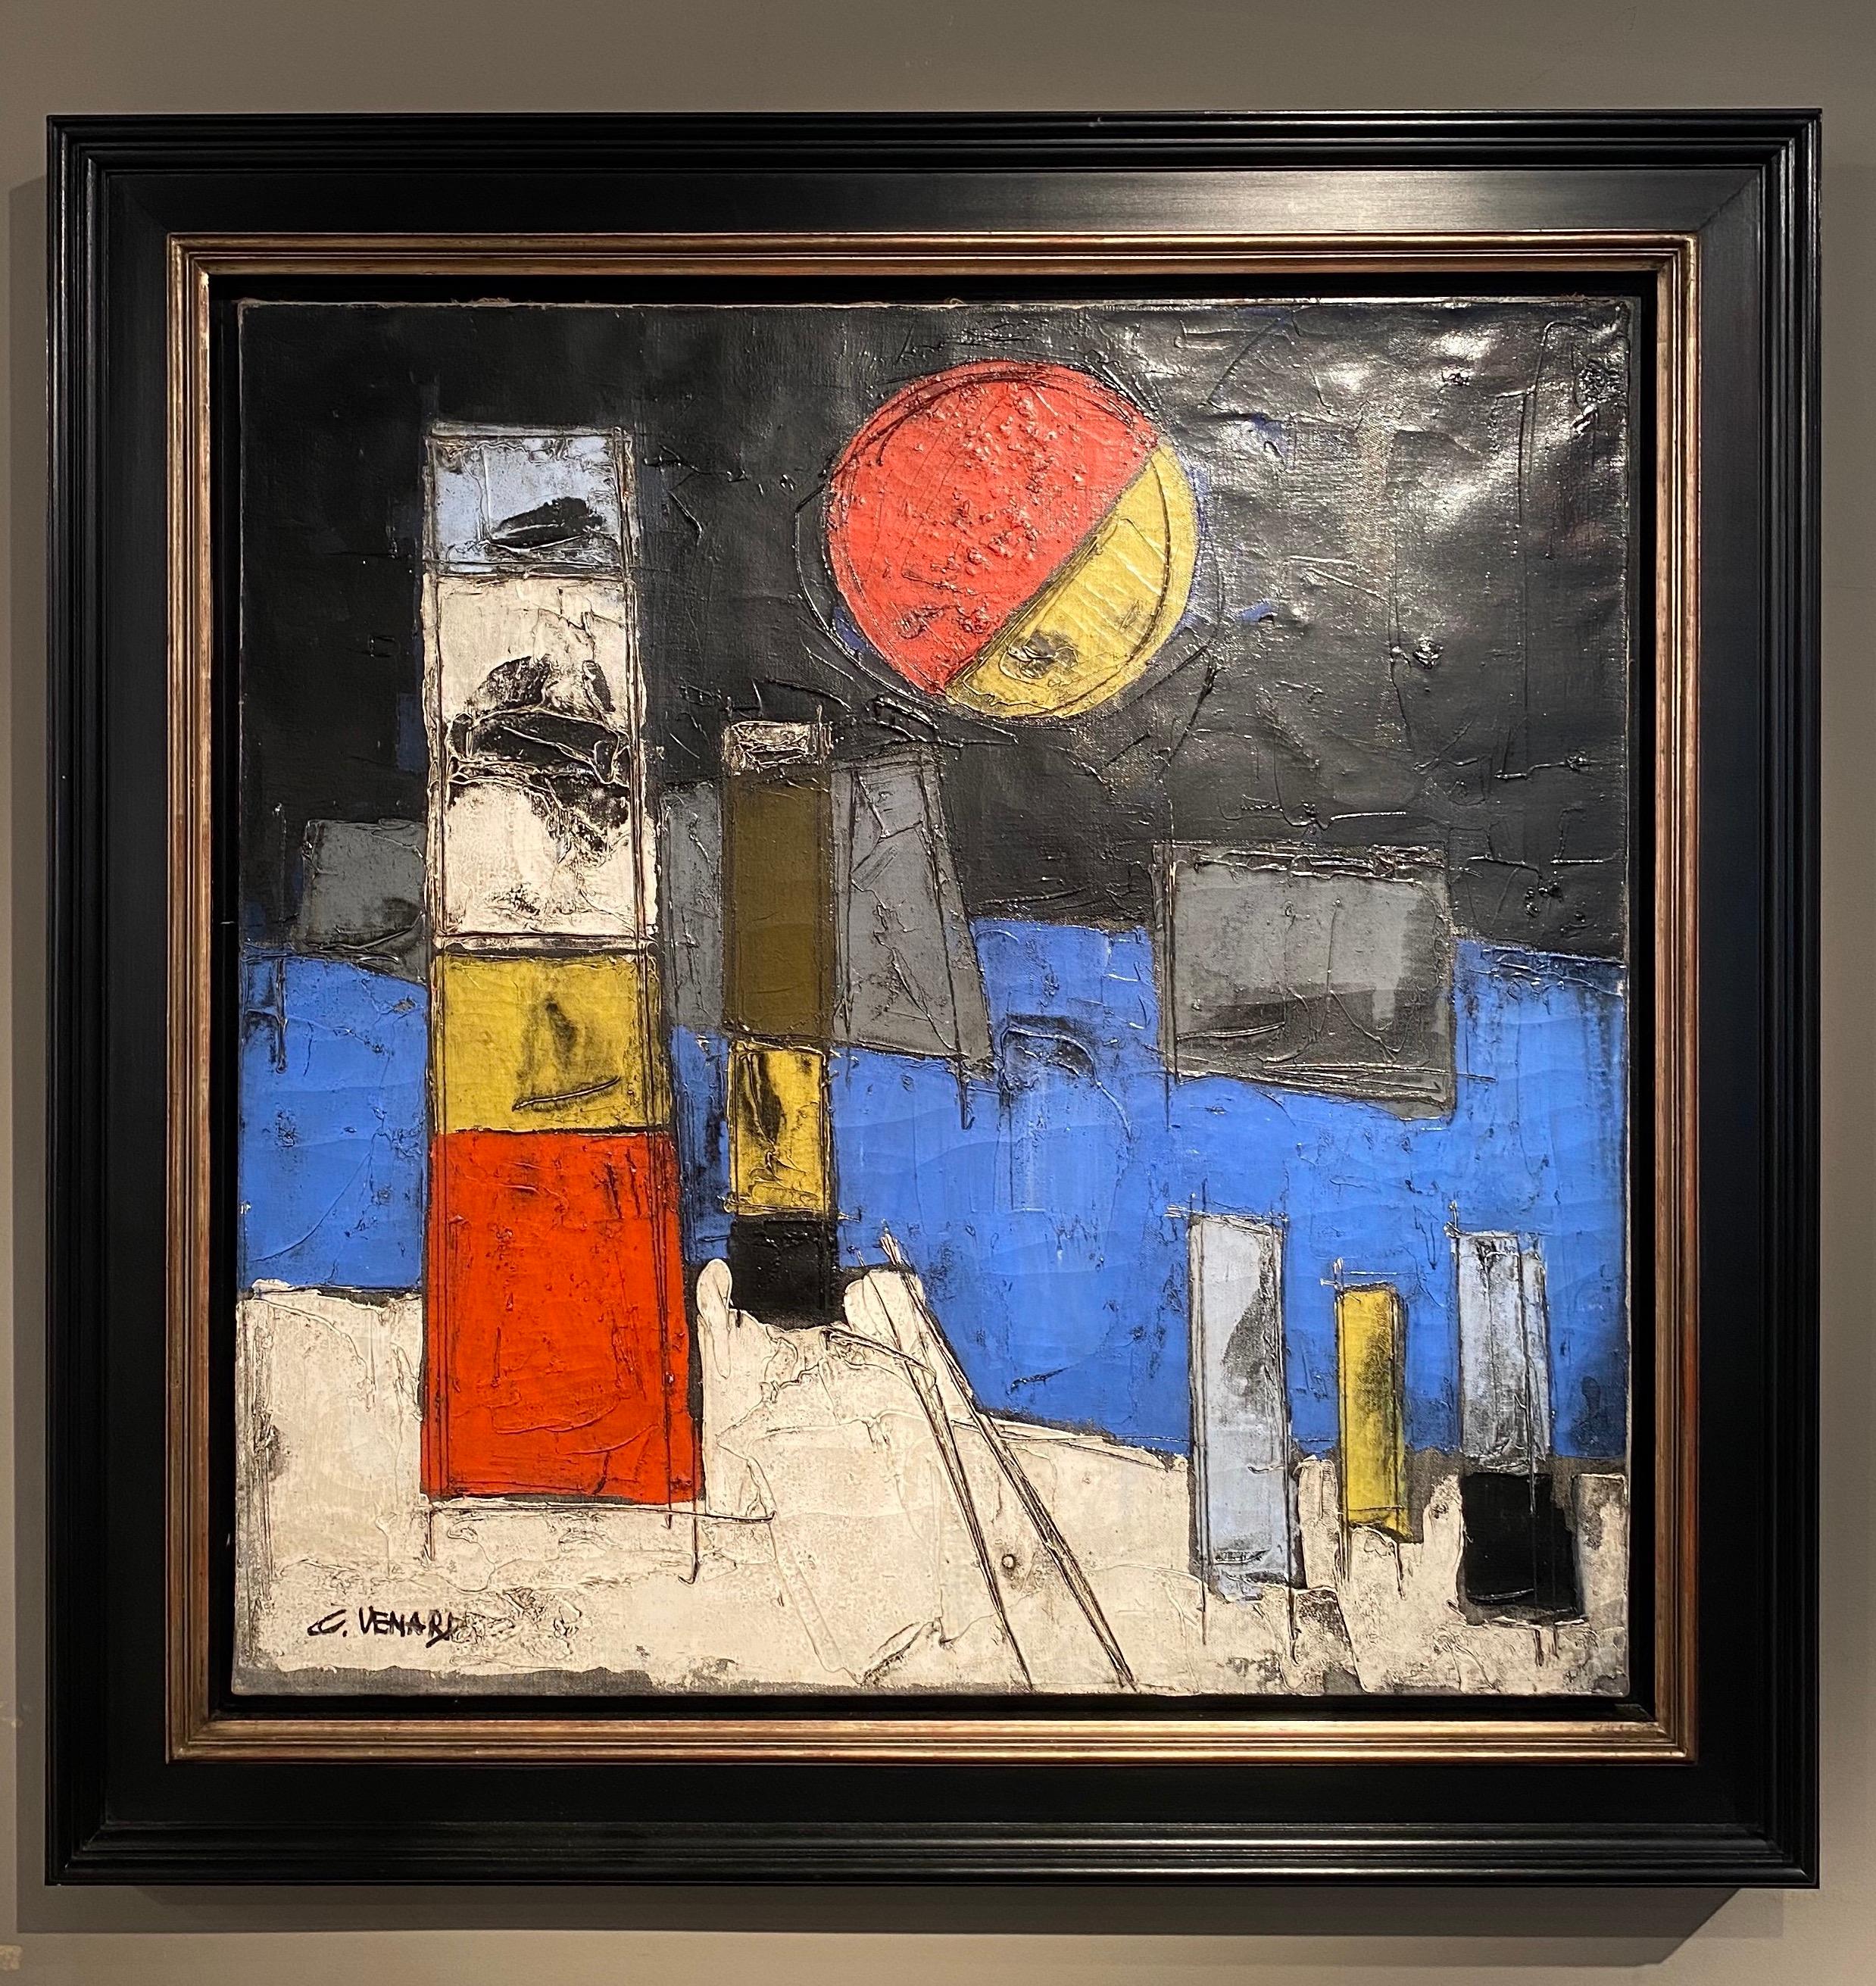 'Le Port' Abstract landscape painting of a harbour, boat, lighthouse and moon - Painting by Claude Vénard